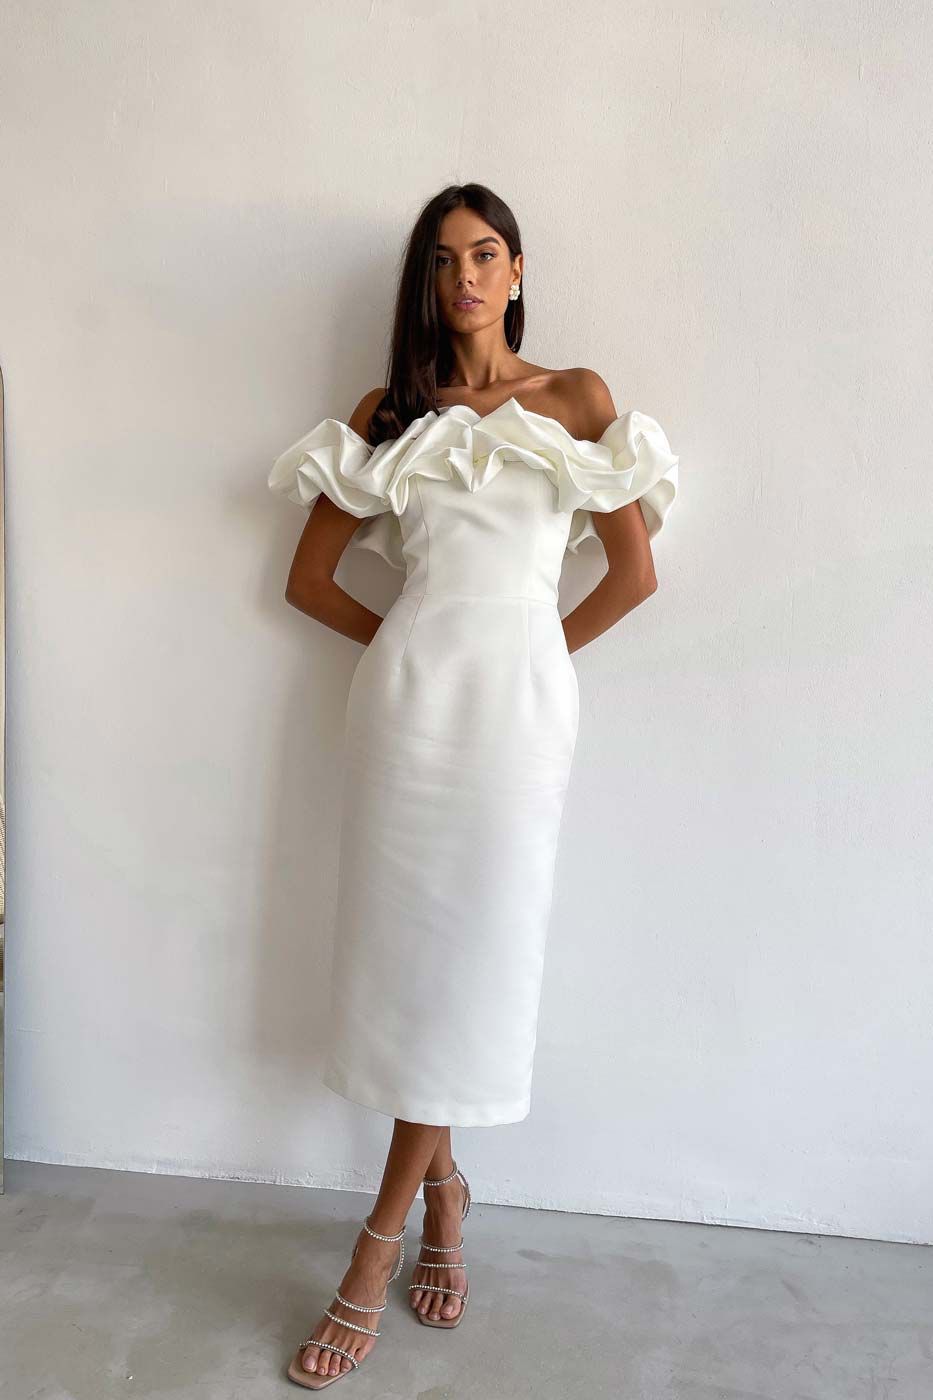 Rochie Mystic, Long Variant, Satin Cotton Fabric, Event Ruffles Dress, White Pearl